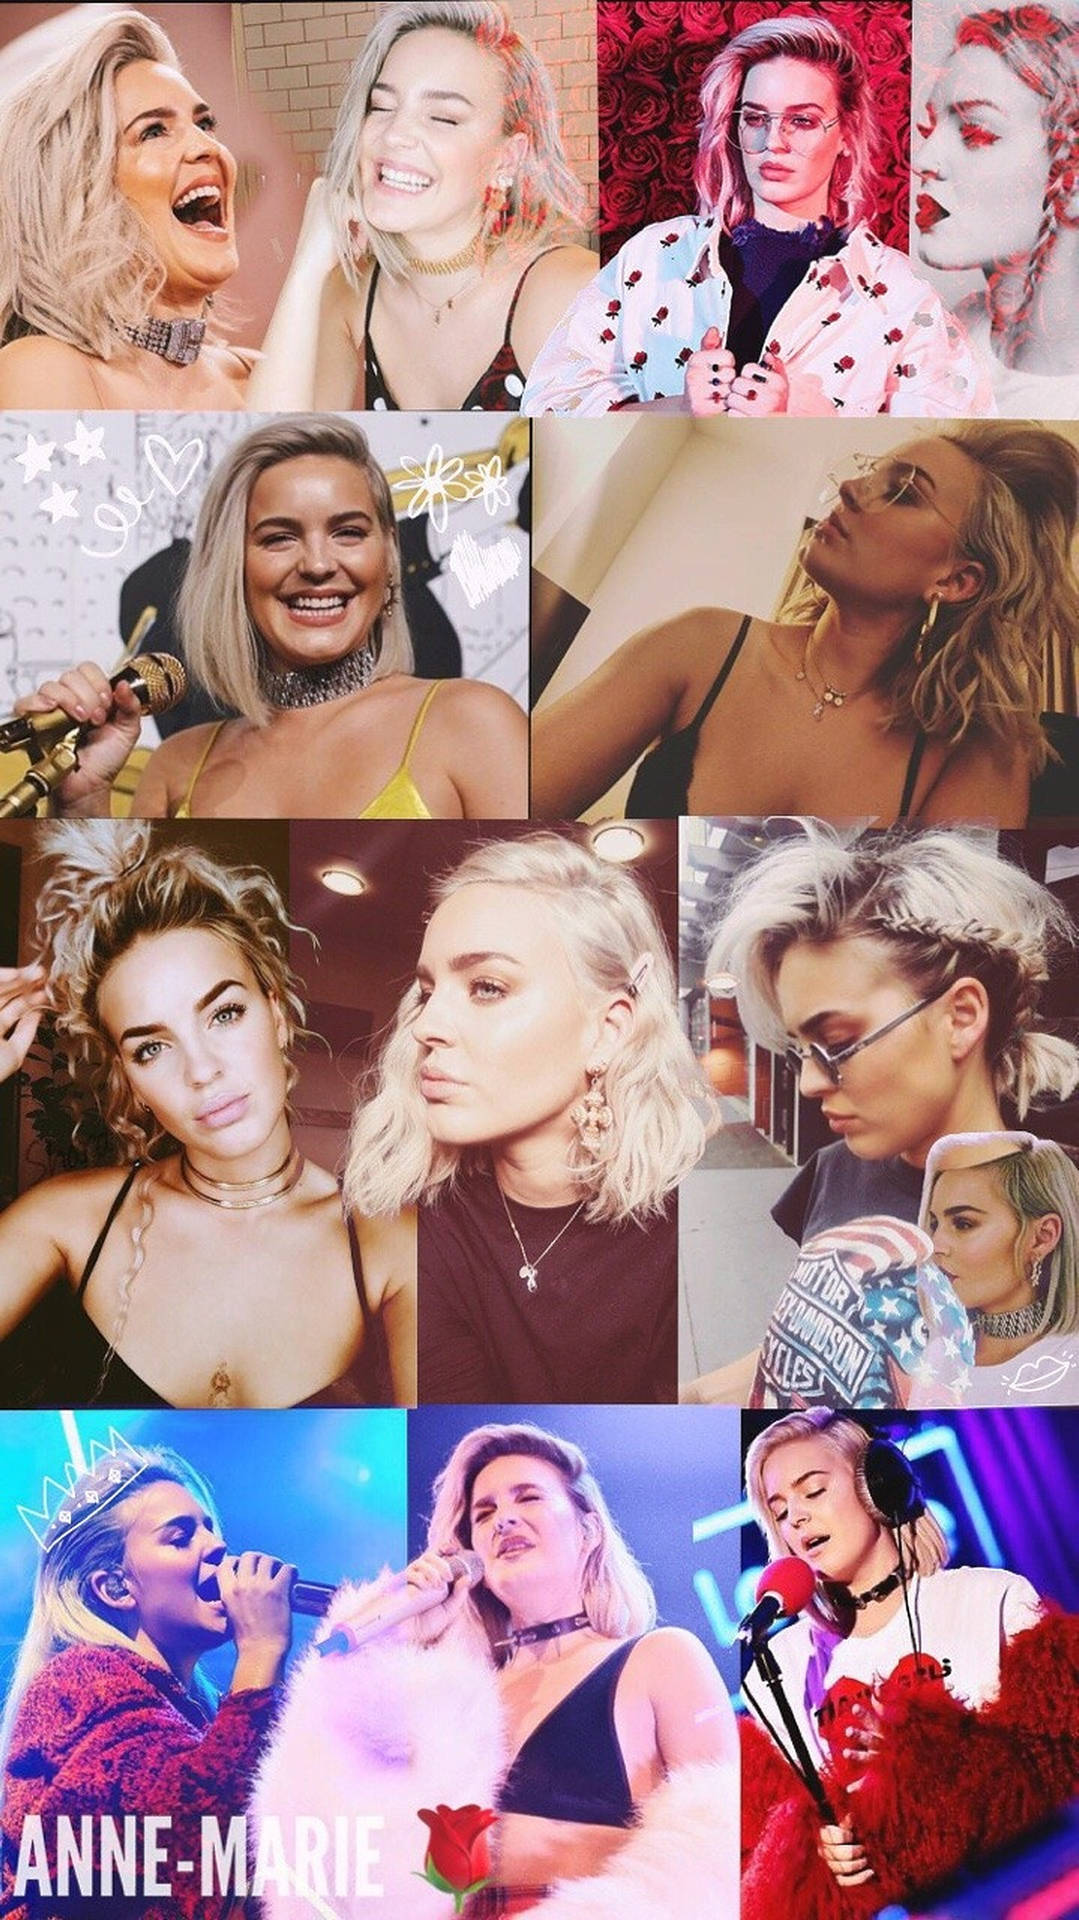 Anne-marie Collage Background